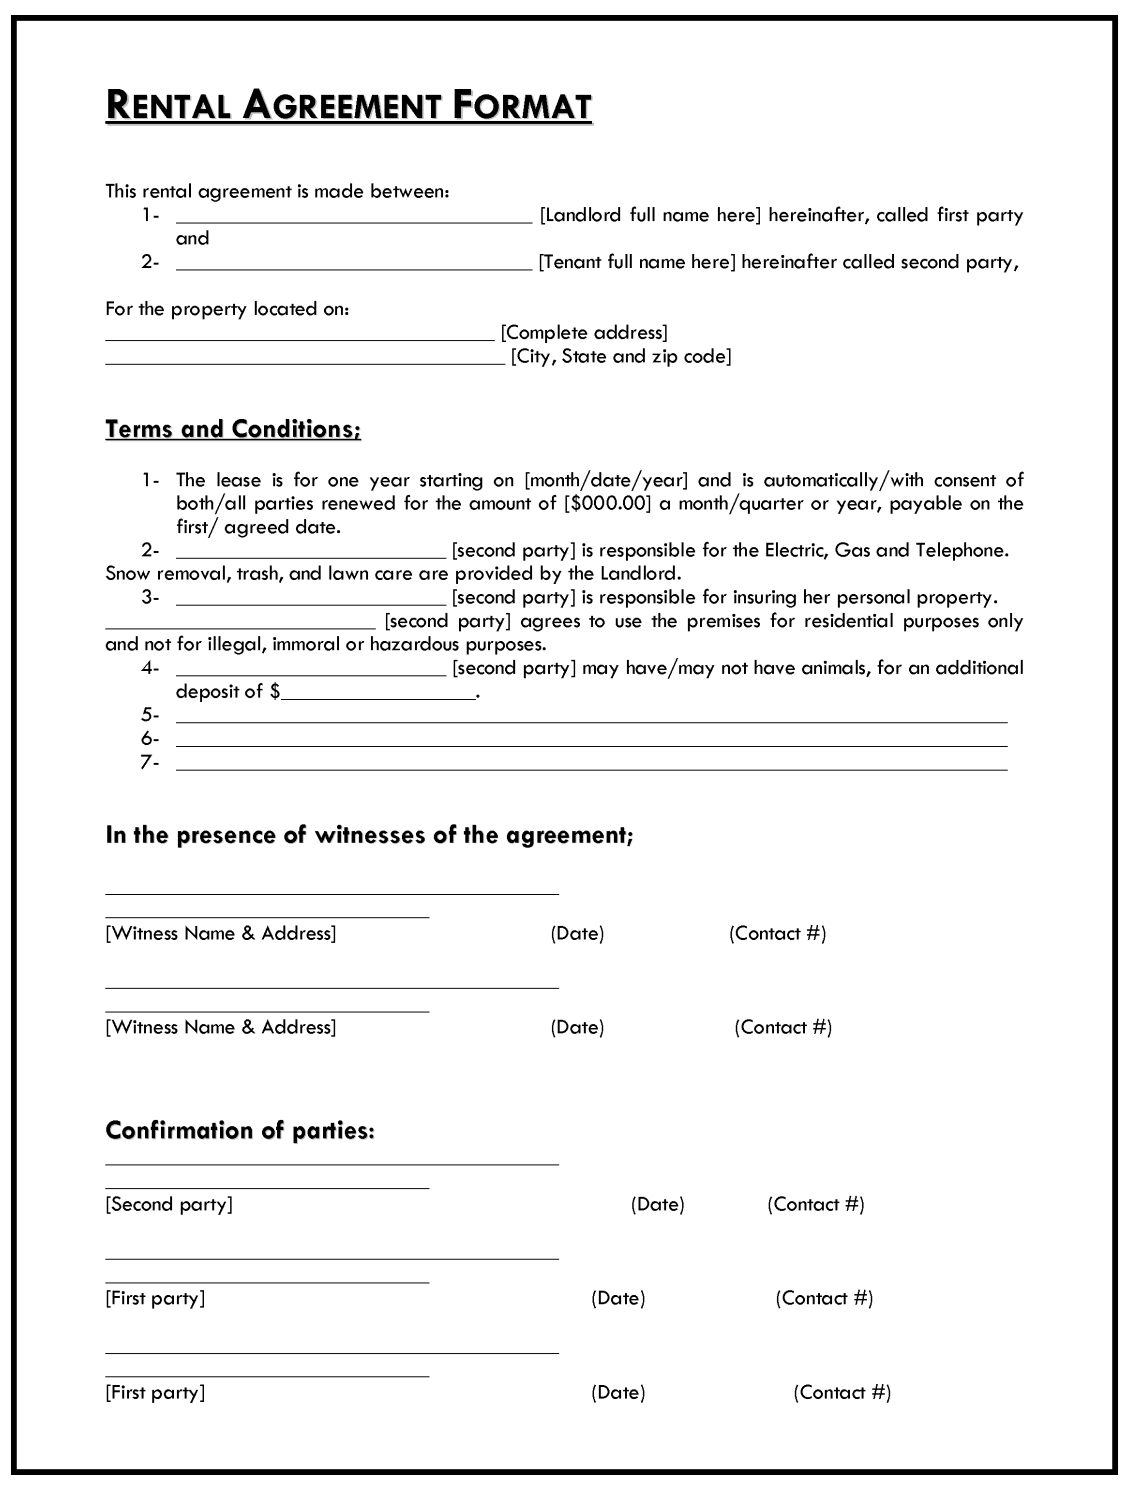 Free Rent Agreement Letter 16 Rental Agreement Letter Templates Word